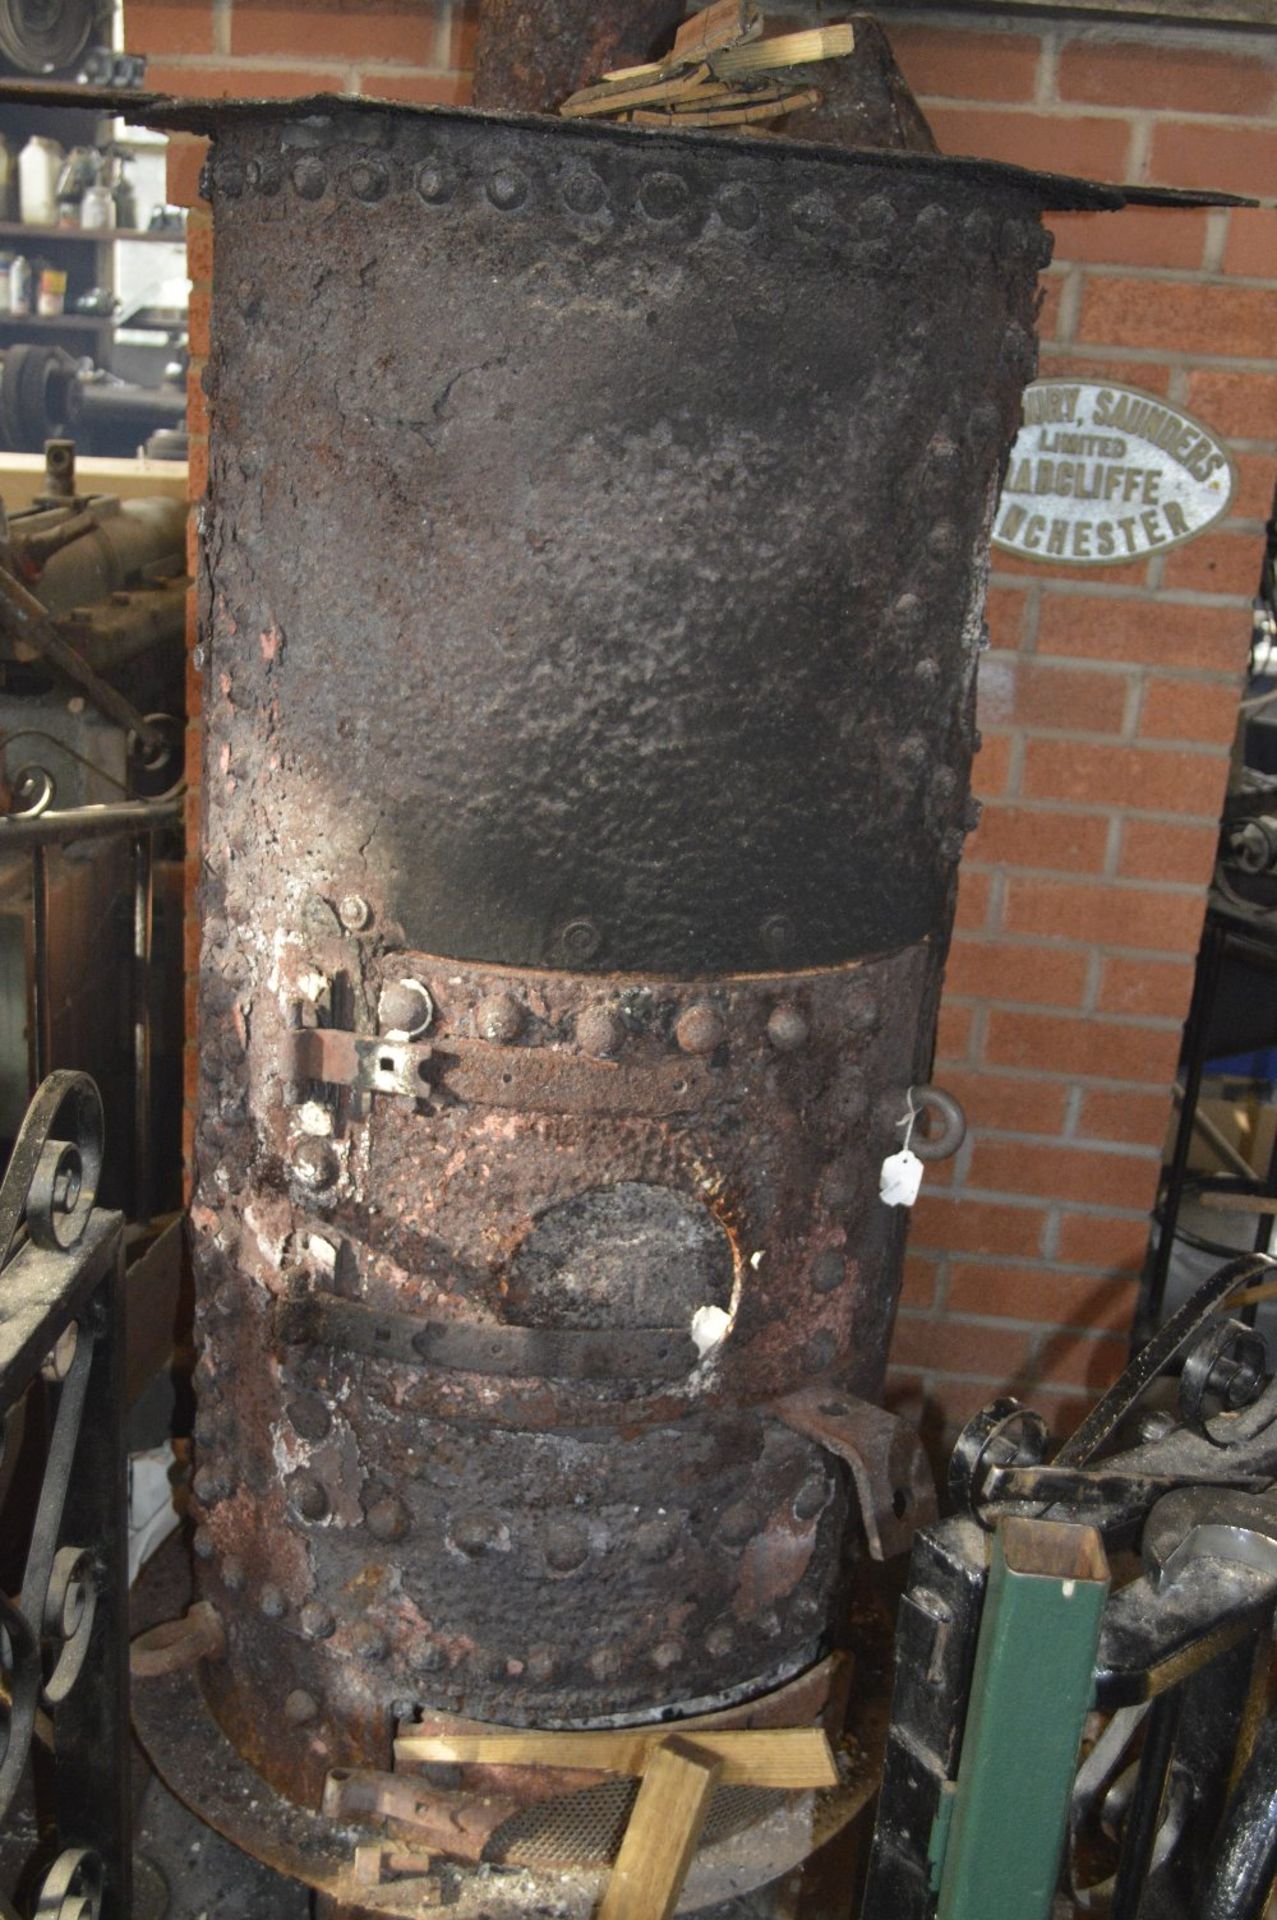 The original boiler from Betsy the steam engine, converted to a wood burner, diameter approx. 30".